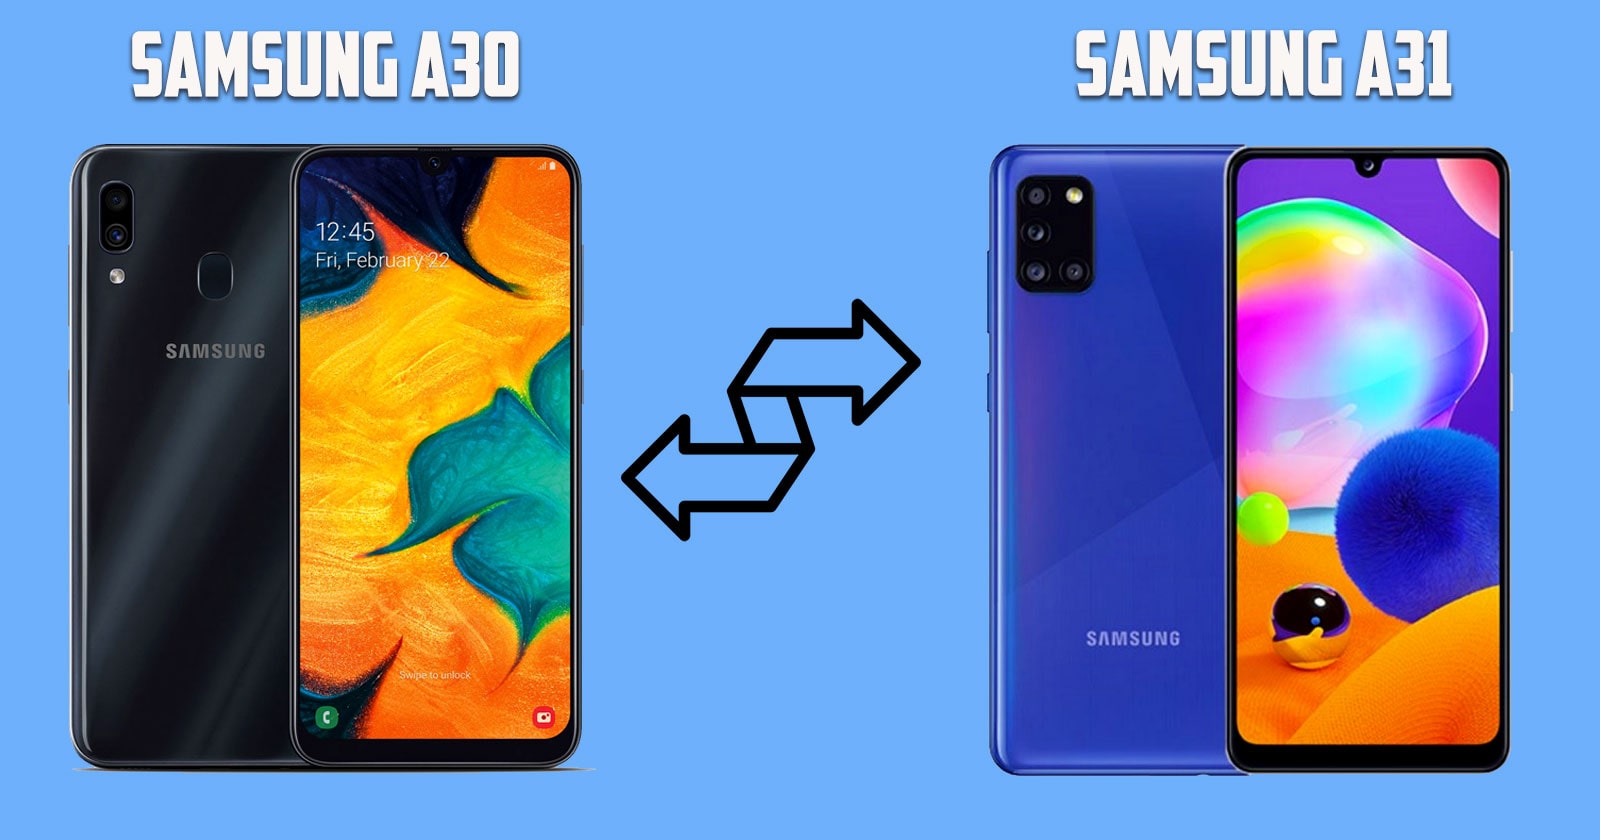 What is the difference between Samsung a30 and a31?